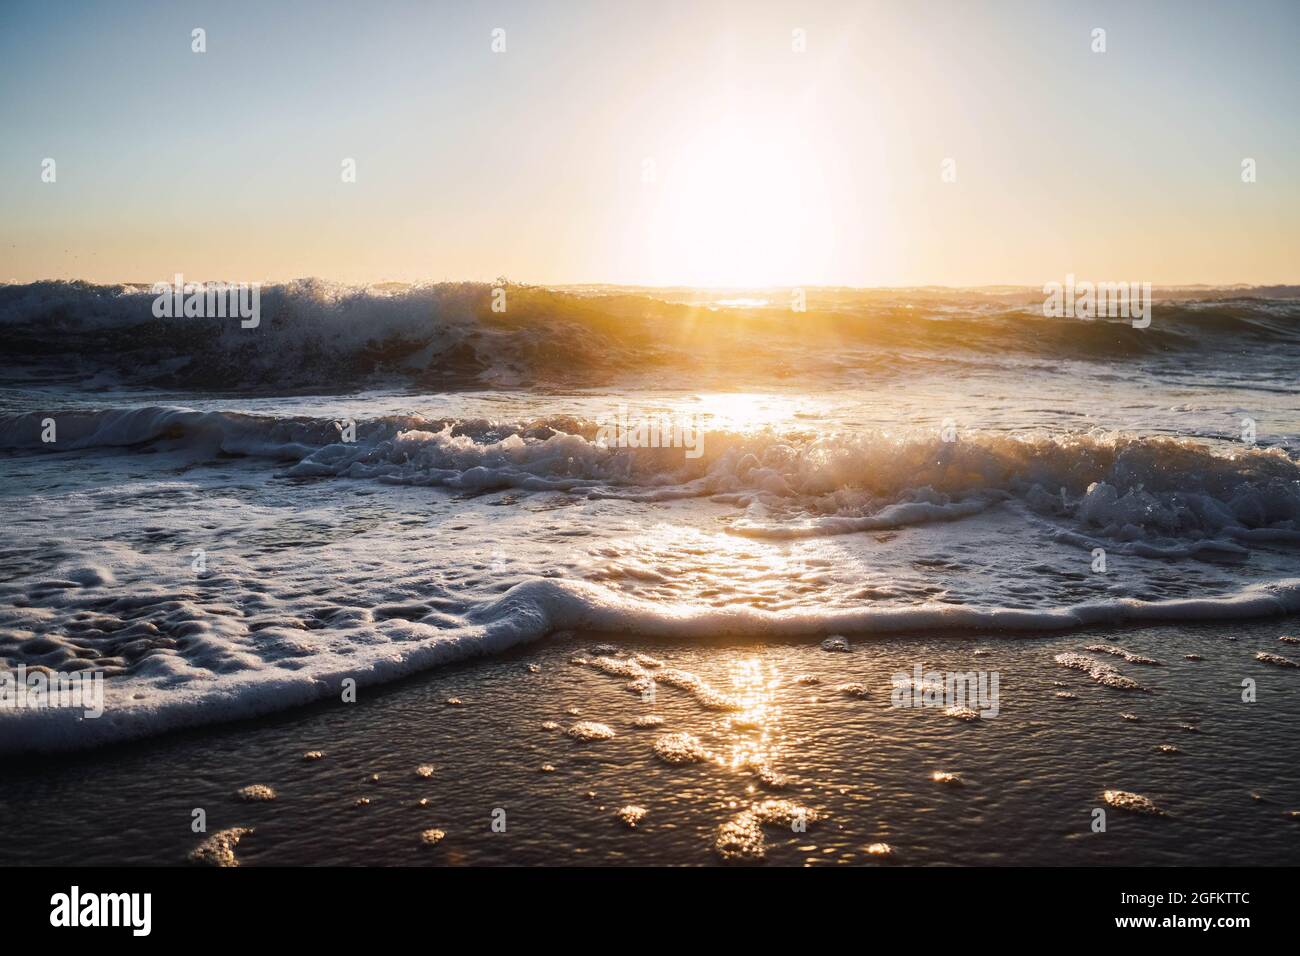 waves breaking on the shore of the beach with foam at sunset Stock Photo